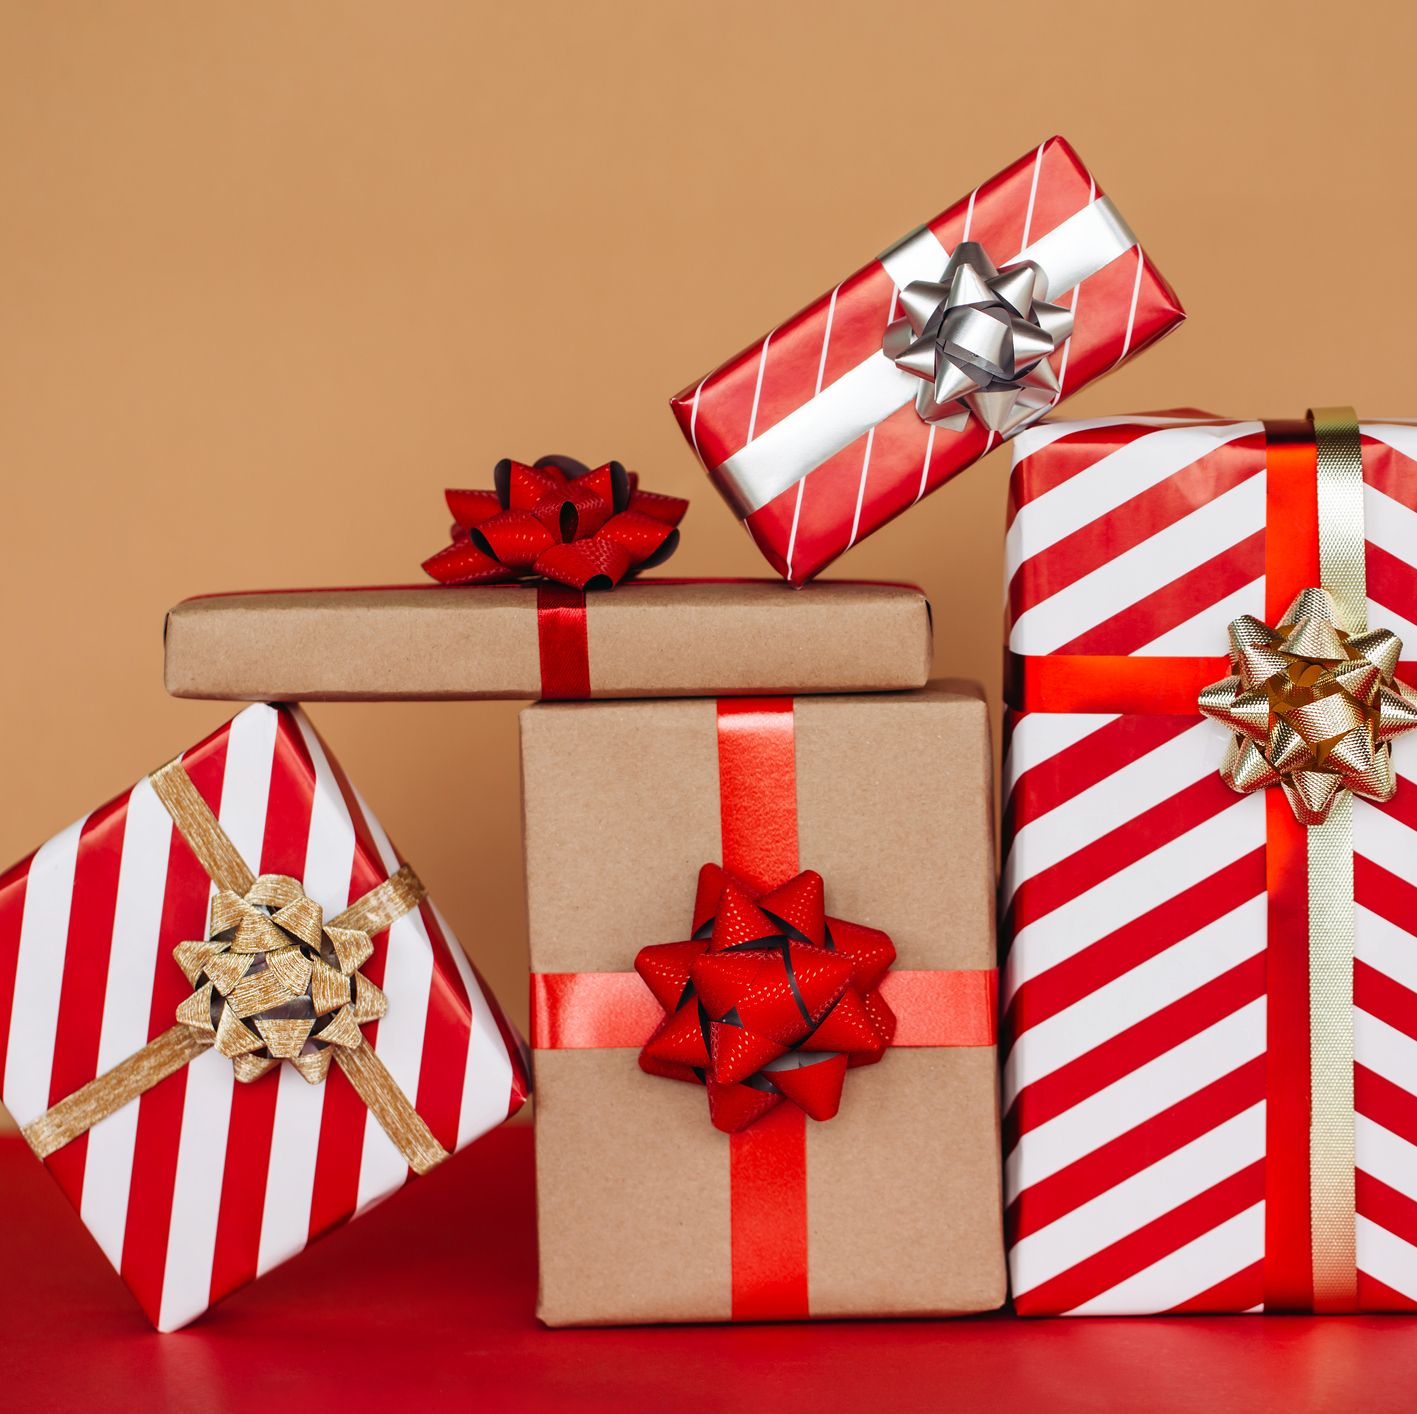 Is Wrapping Paper Recyclable? Here's the Deal